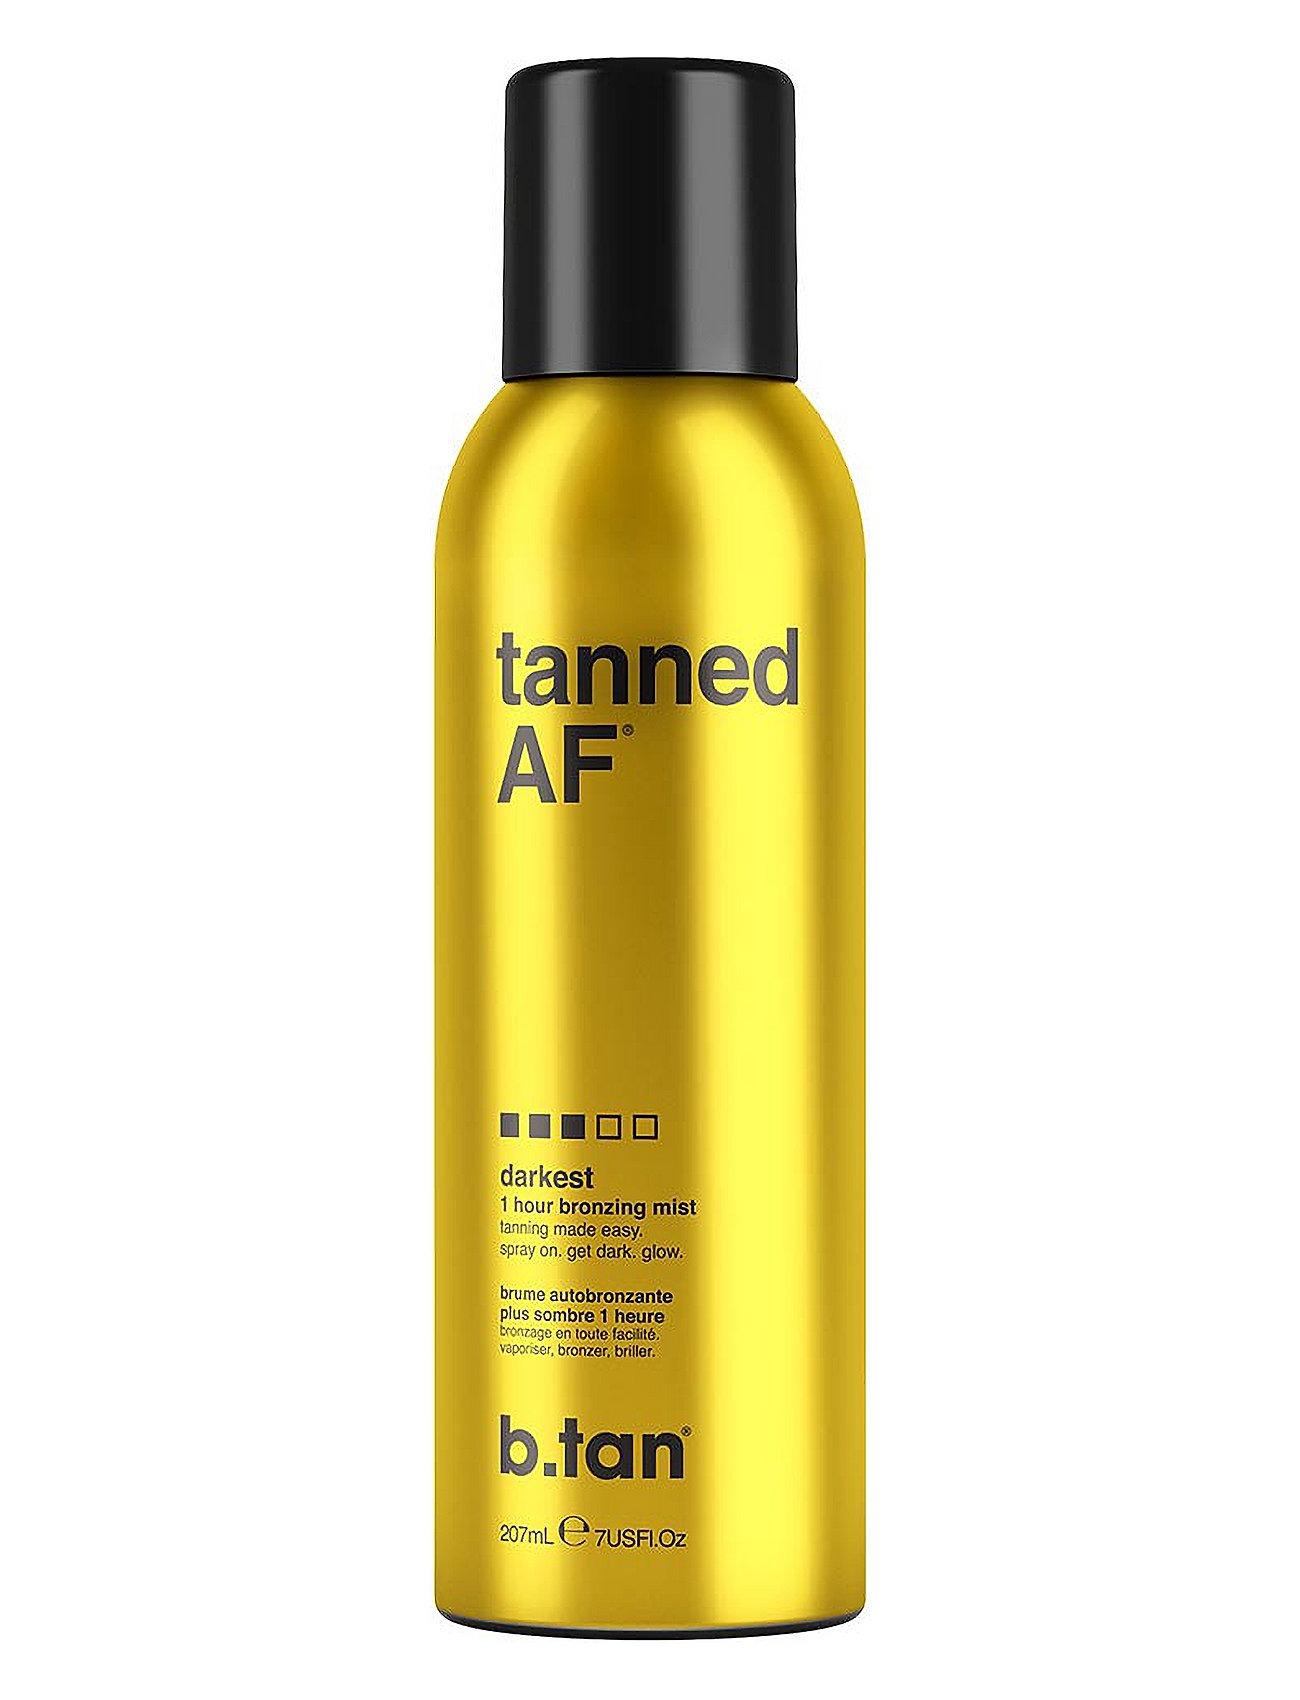 Tanned Af Self Tan Bronzing Mist Beauty Women Skin Care Sun Products Self Tanners Mists Nude B.Tan